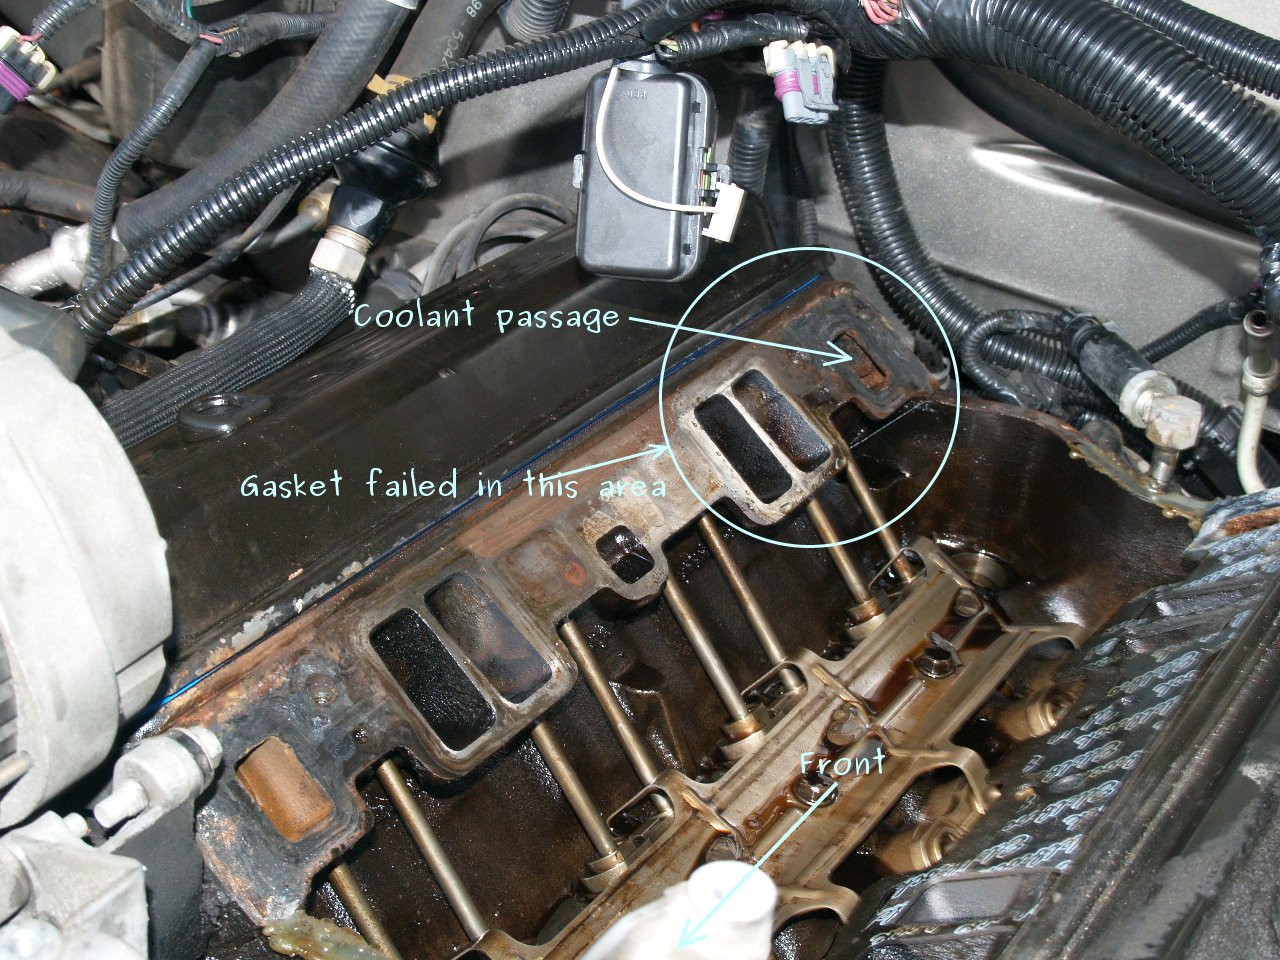 See P196E in engine